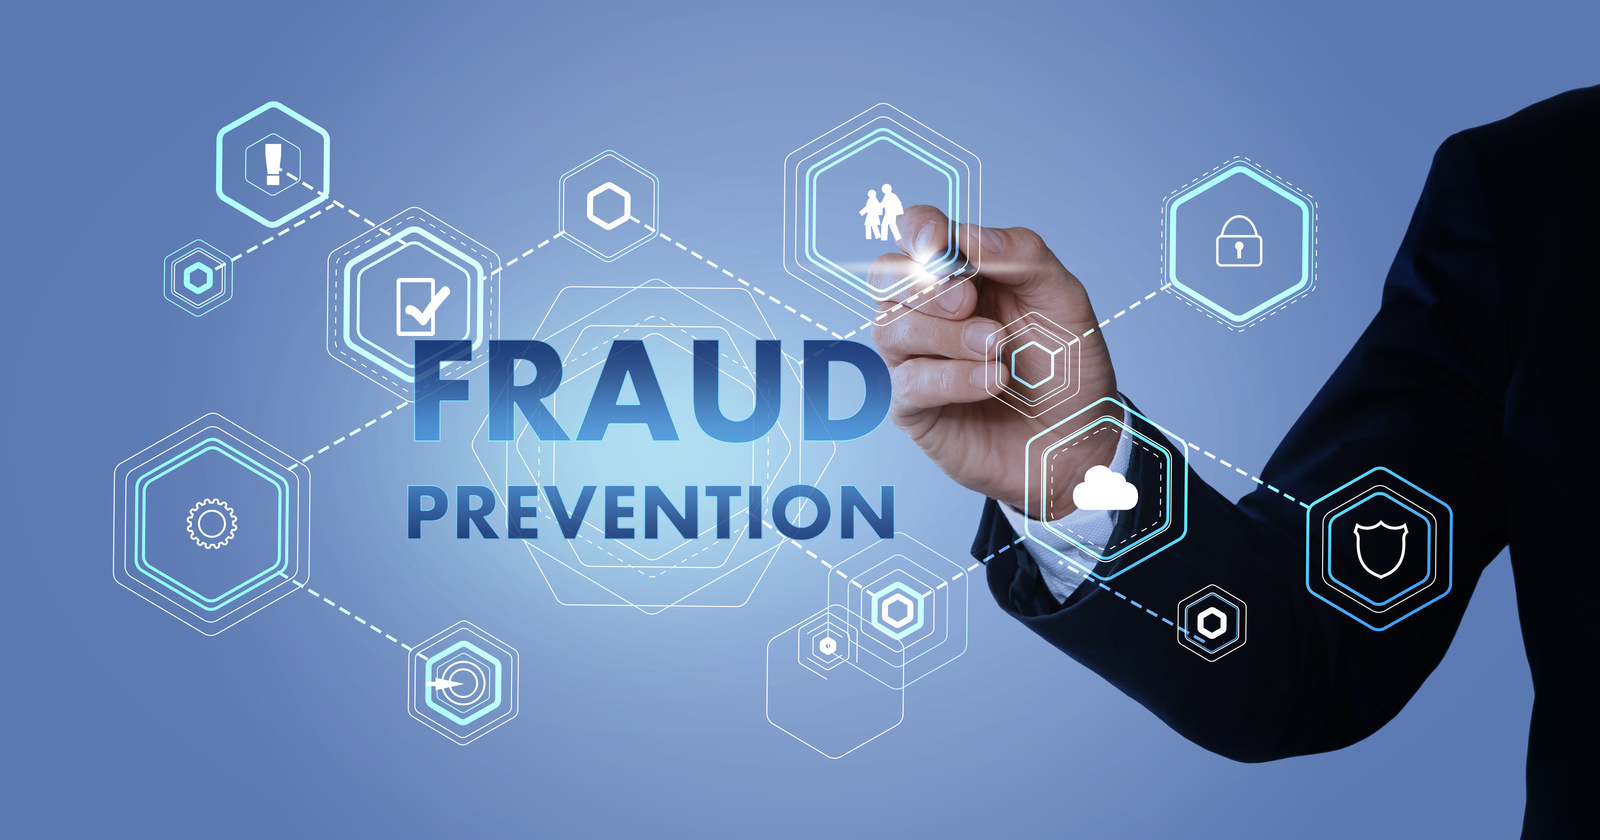 Fraud Prevention. Man Using Digital Screen, Closeup. Scheme with Icons on Light Blue Background